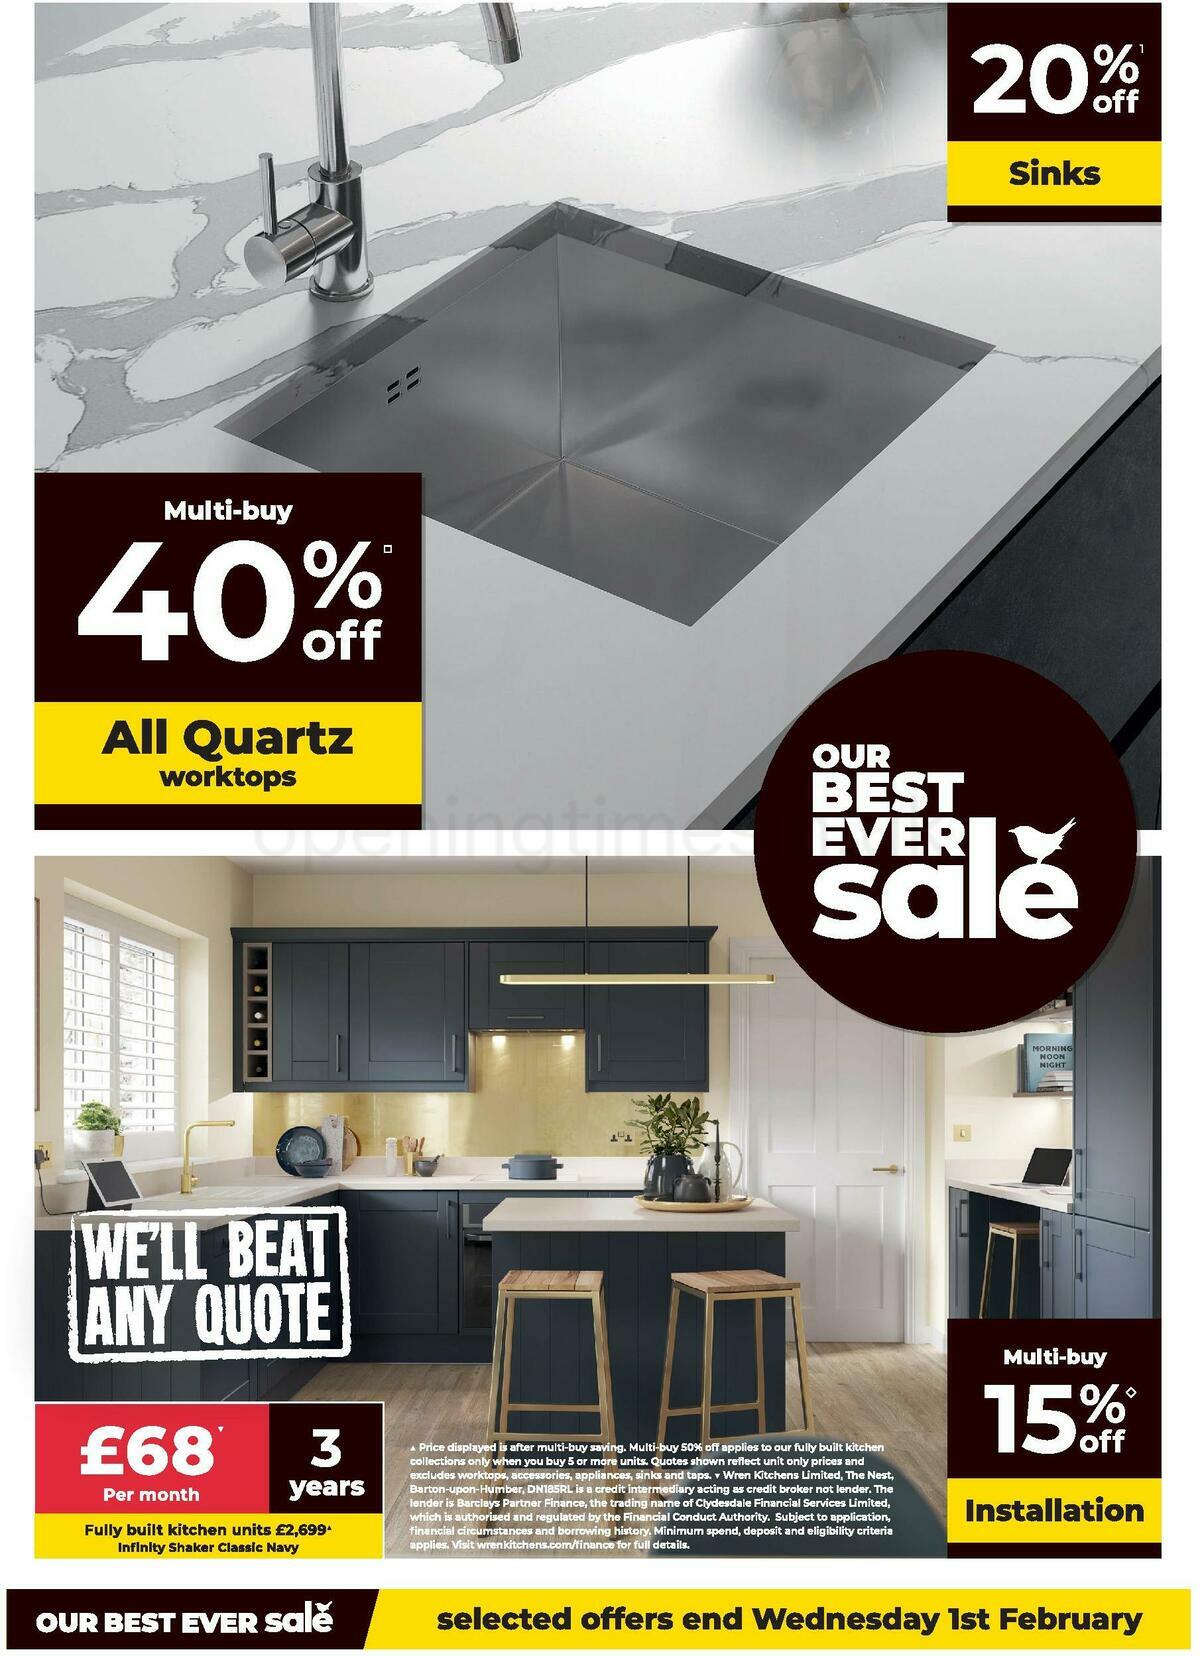 Wren Kitchens Offers from 19 January